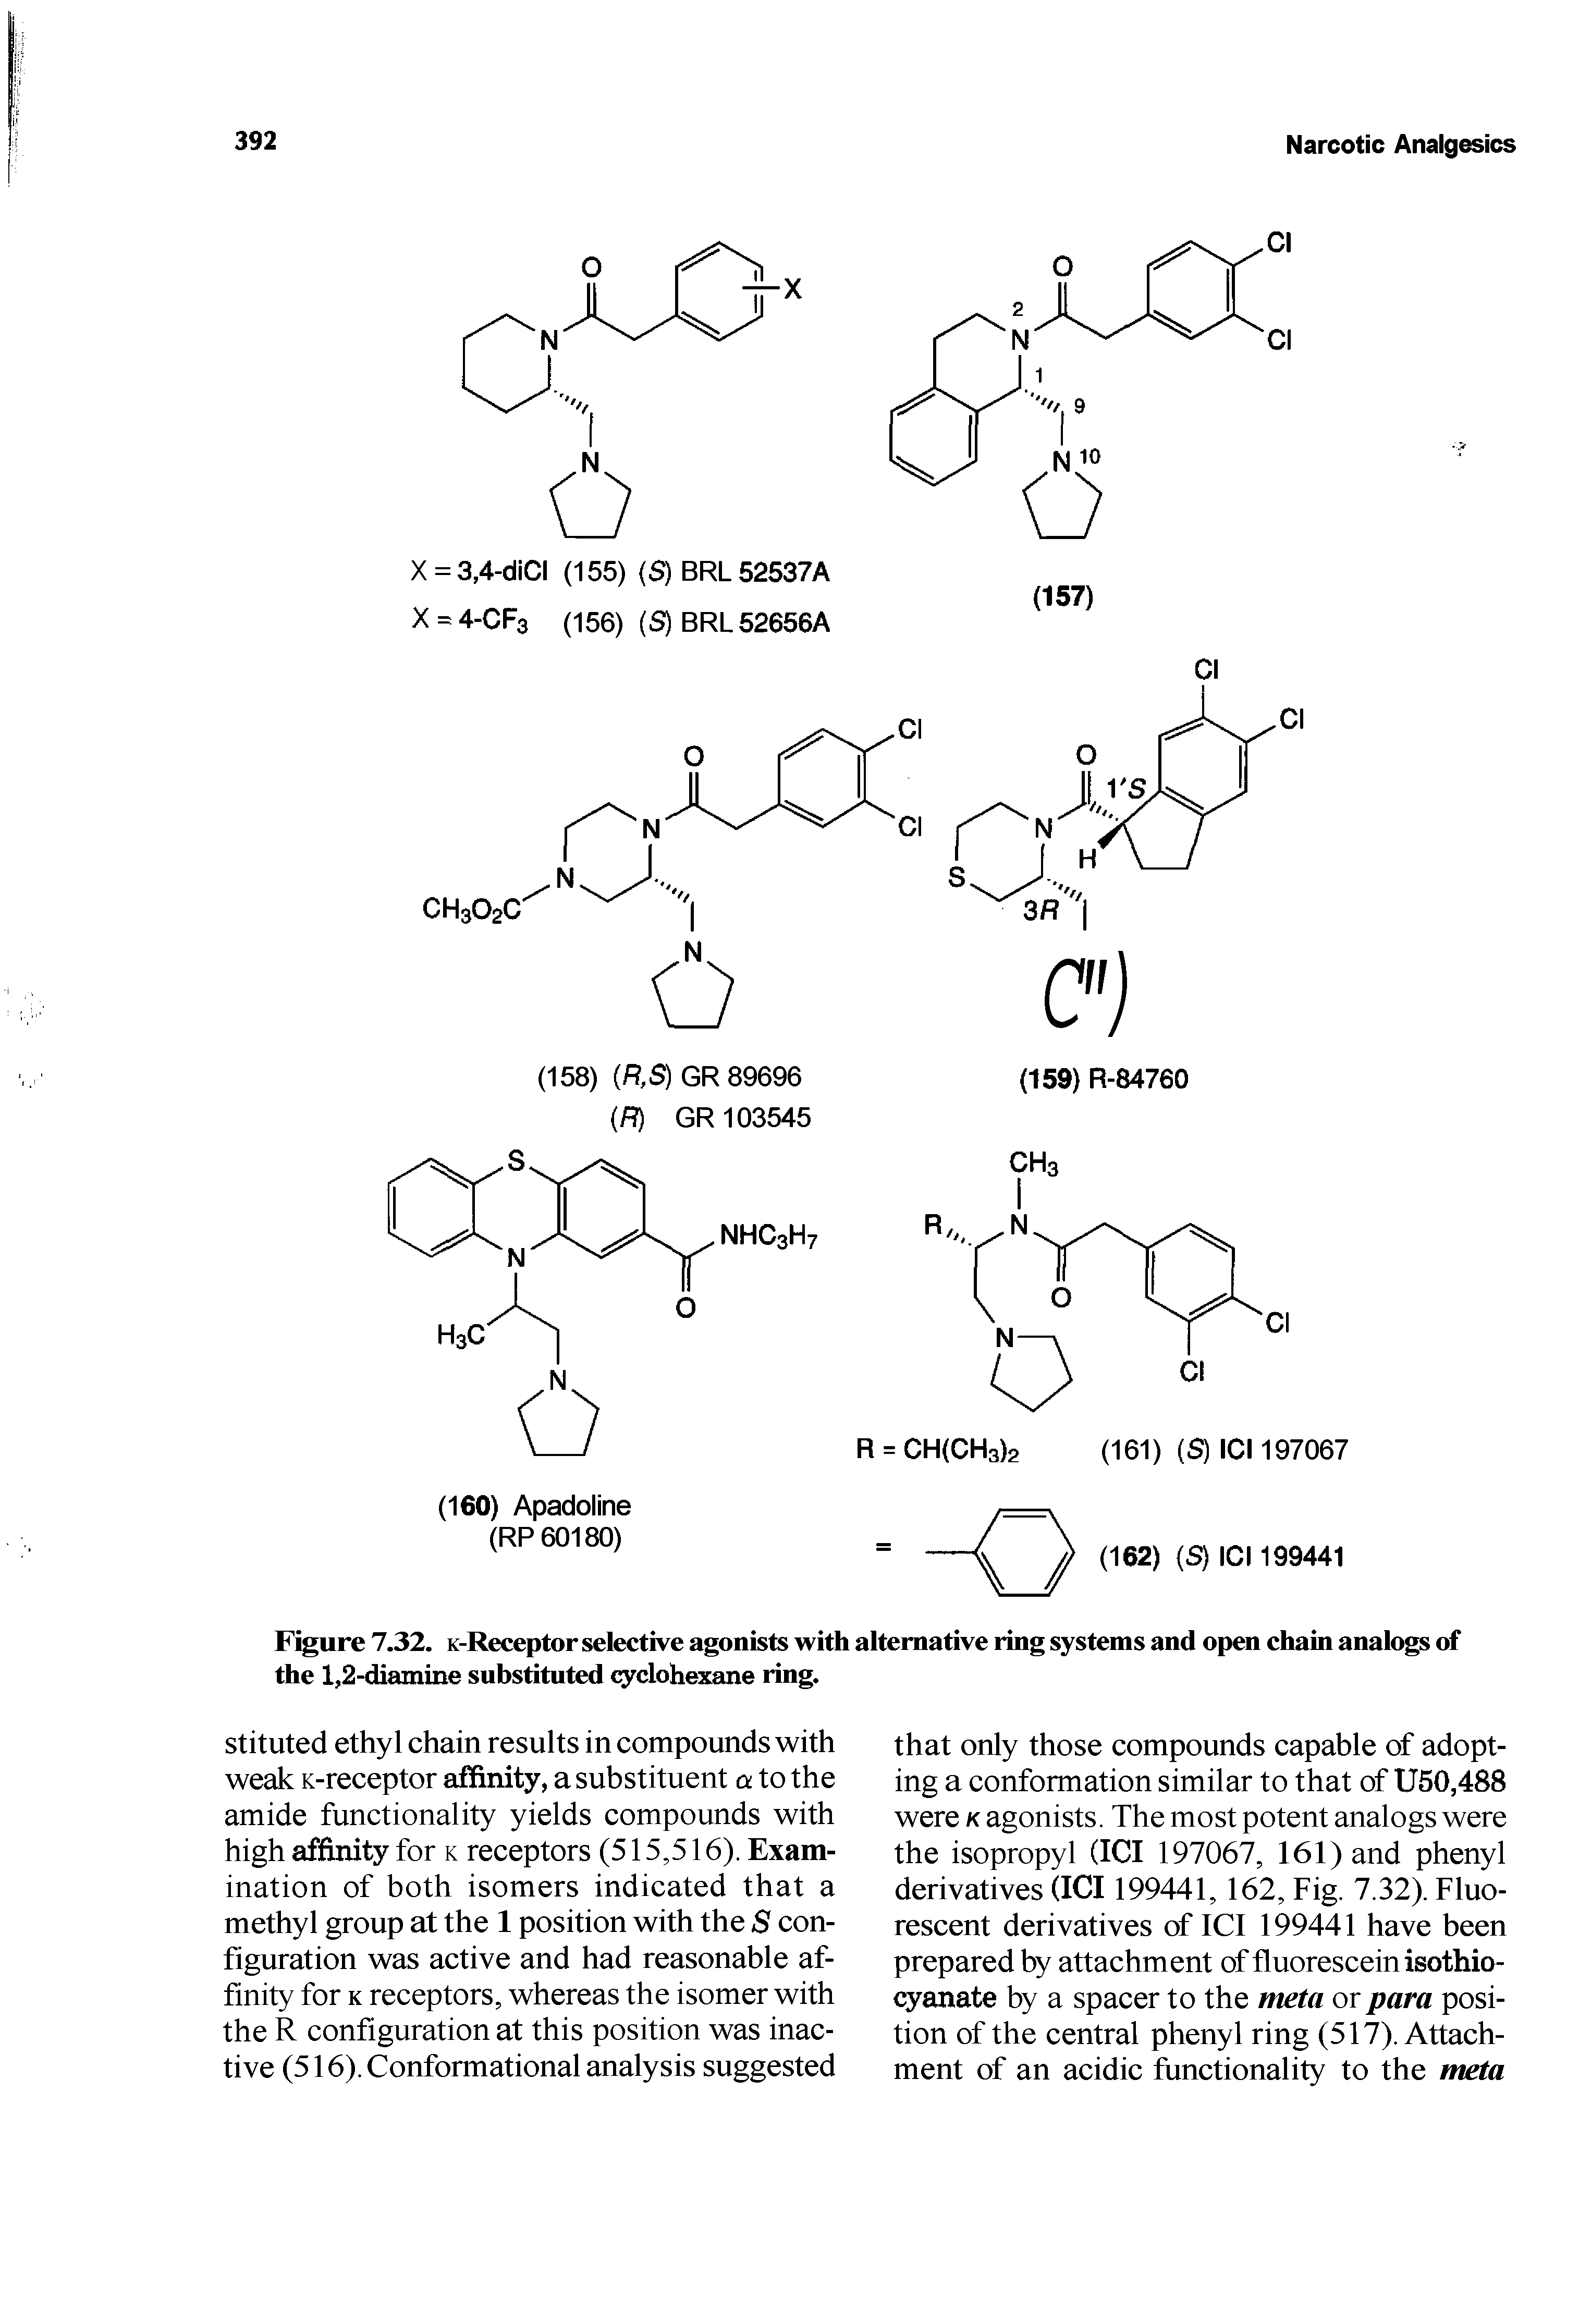 Figure 7.32. K-Receptor selective agonists with alternative ring systems and open chain analogs of the 1,2-diainine substituted cyclohexane ring.